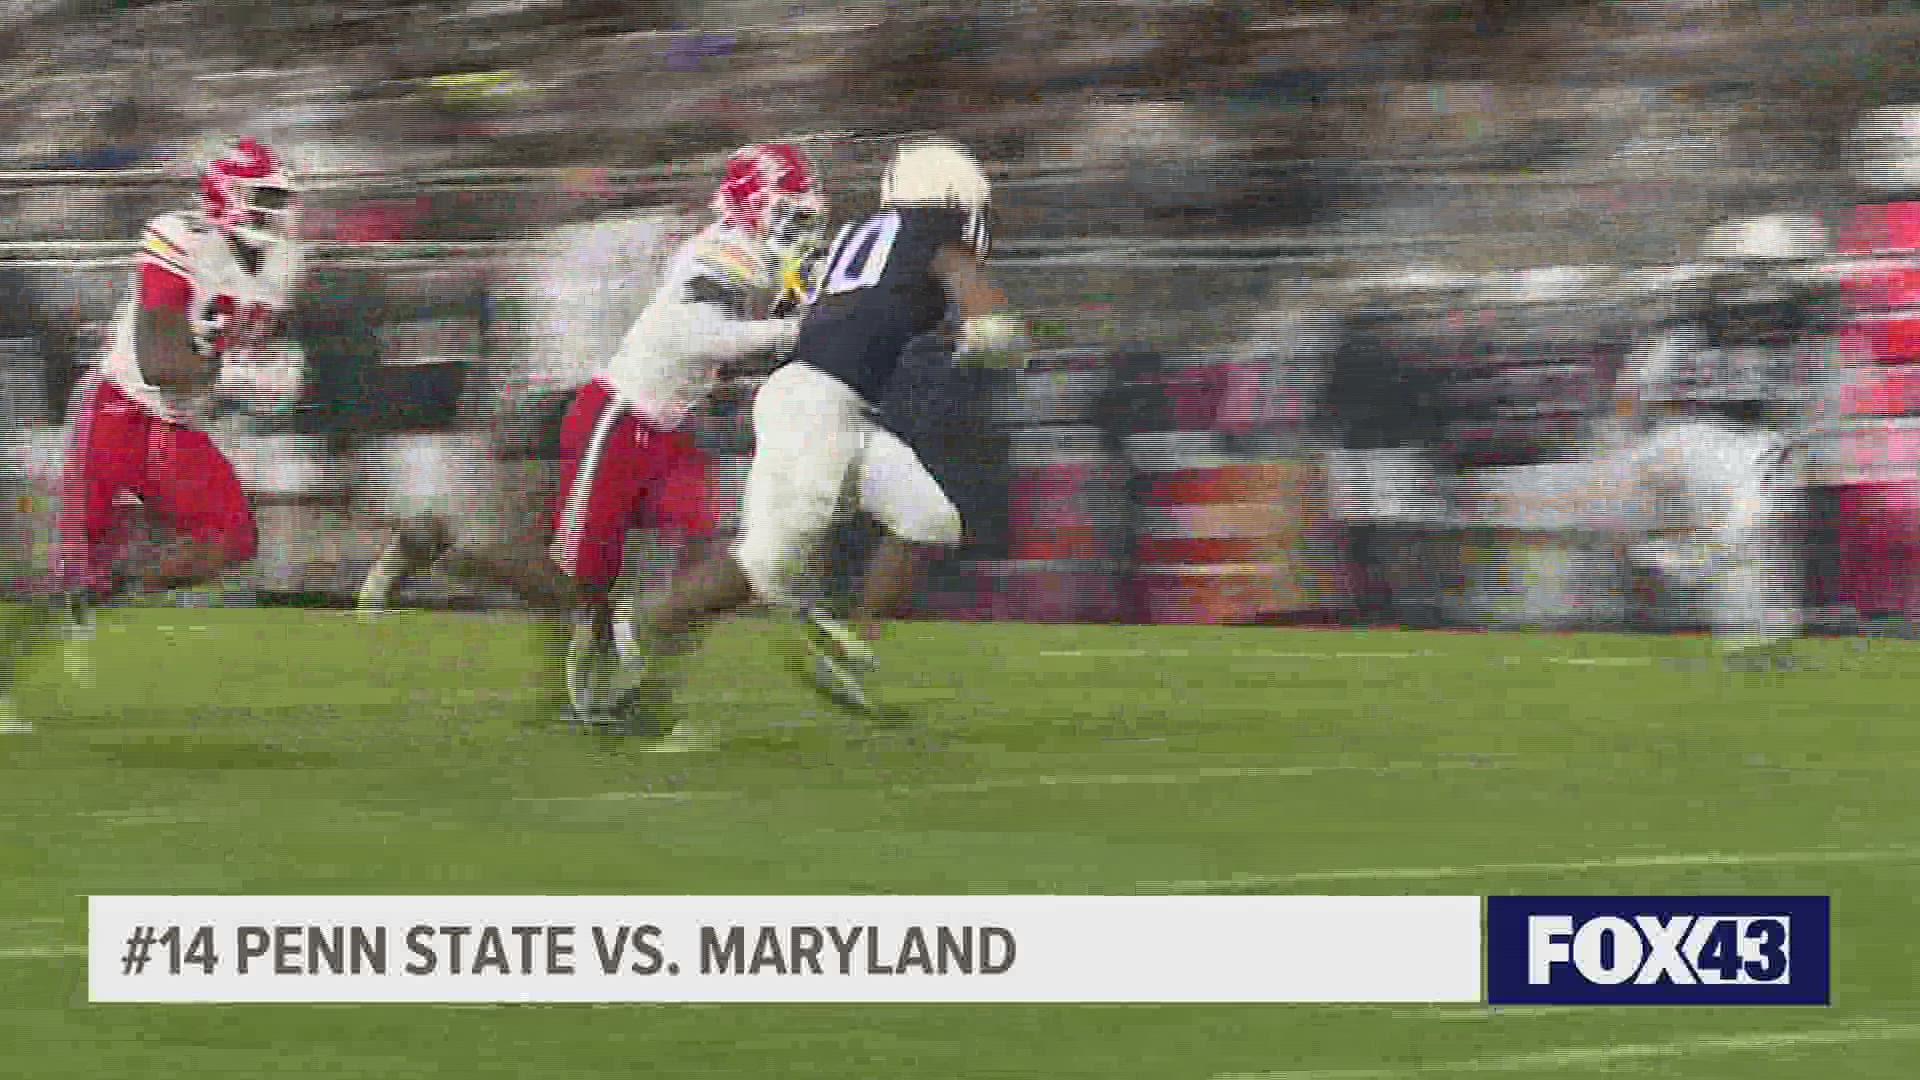 The Nittany Lions hold the Terps to 134 total yards of offense and add another seven sacks to shut out Maryland